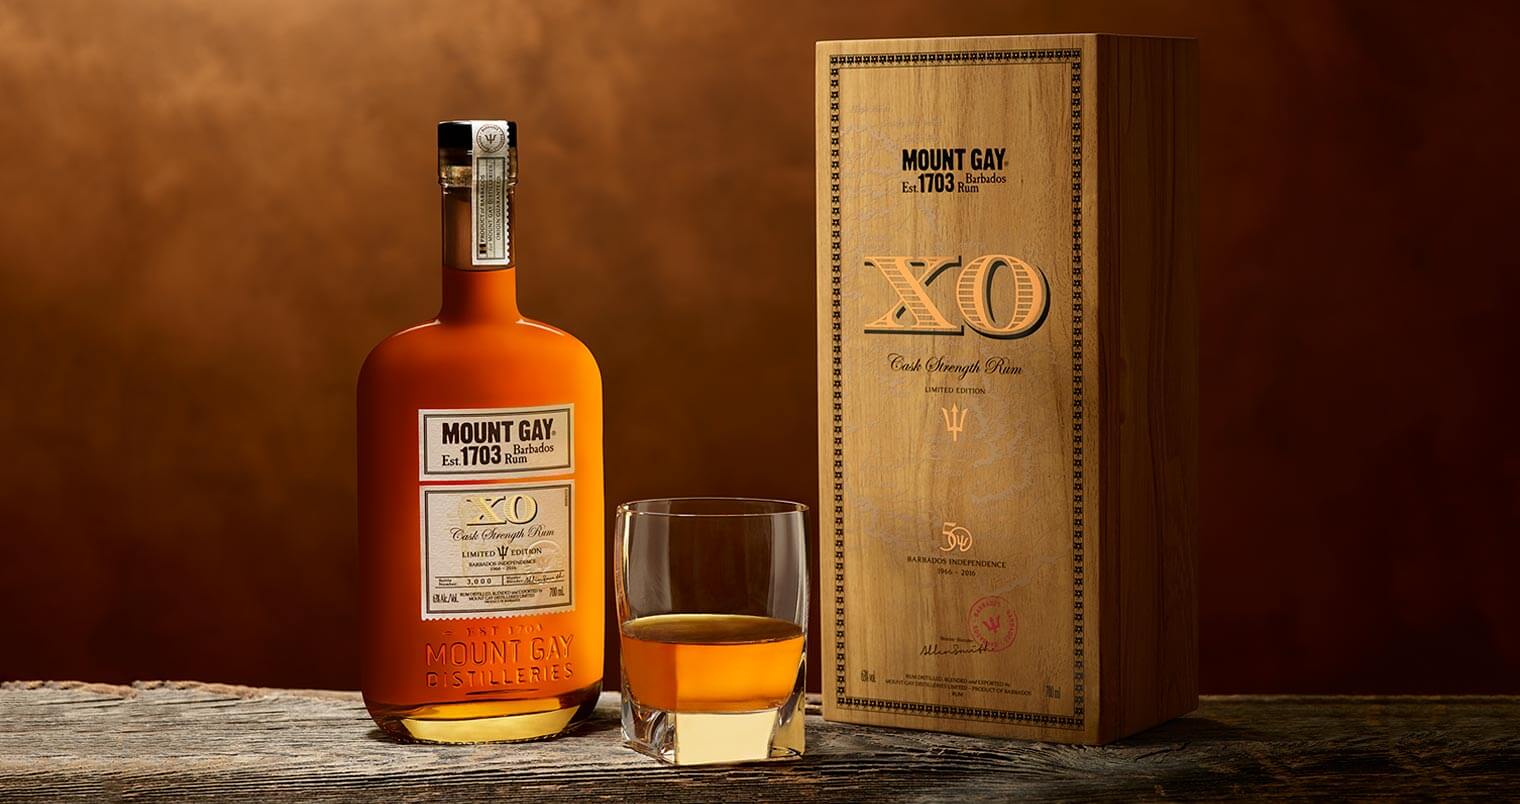 Mount Gay Releases Limited Edition XO Cask Strength, featured image